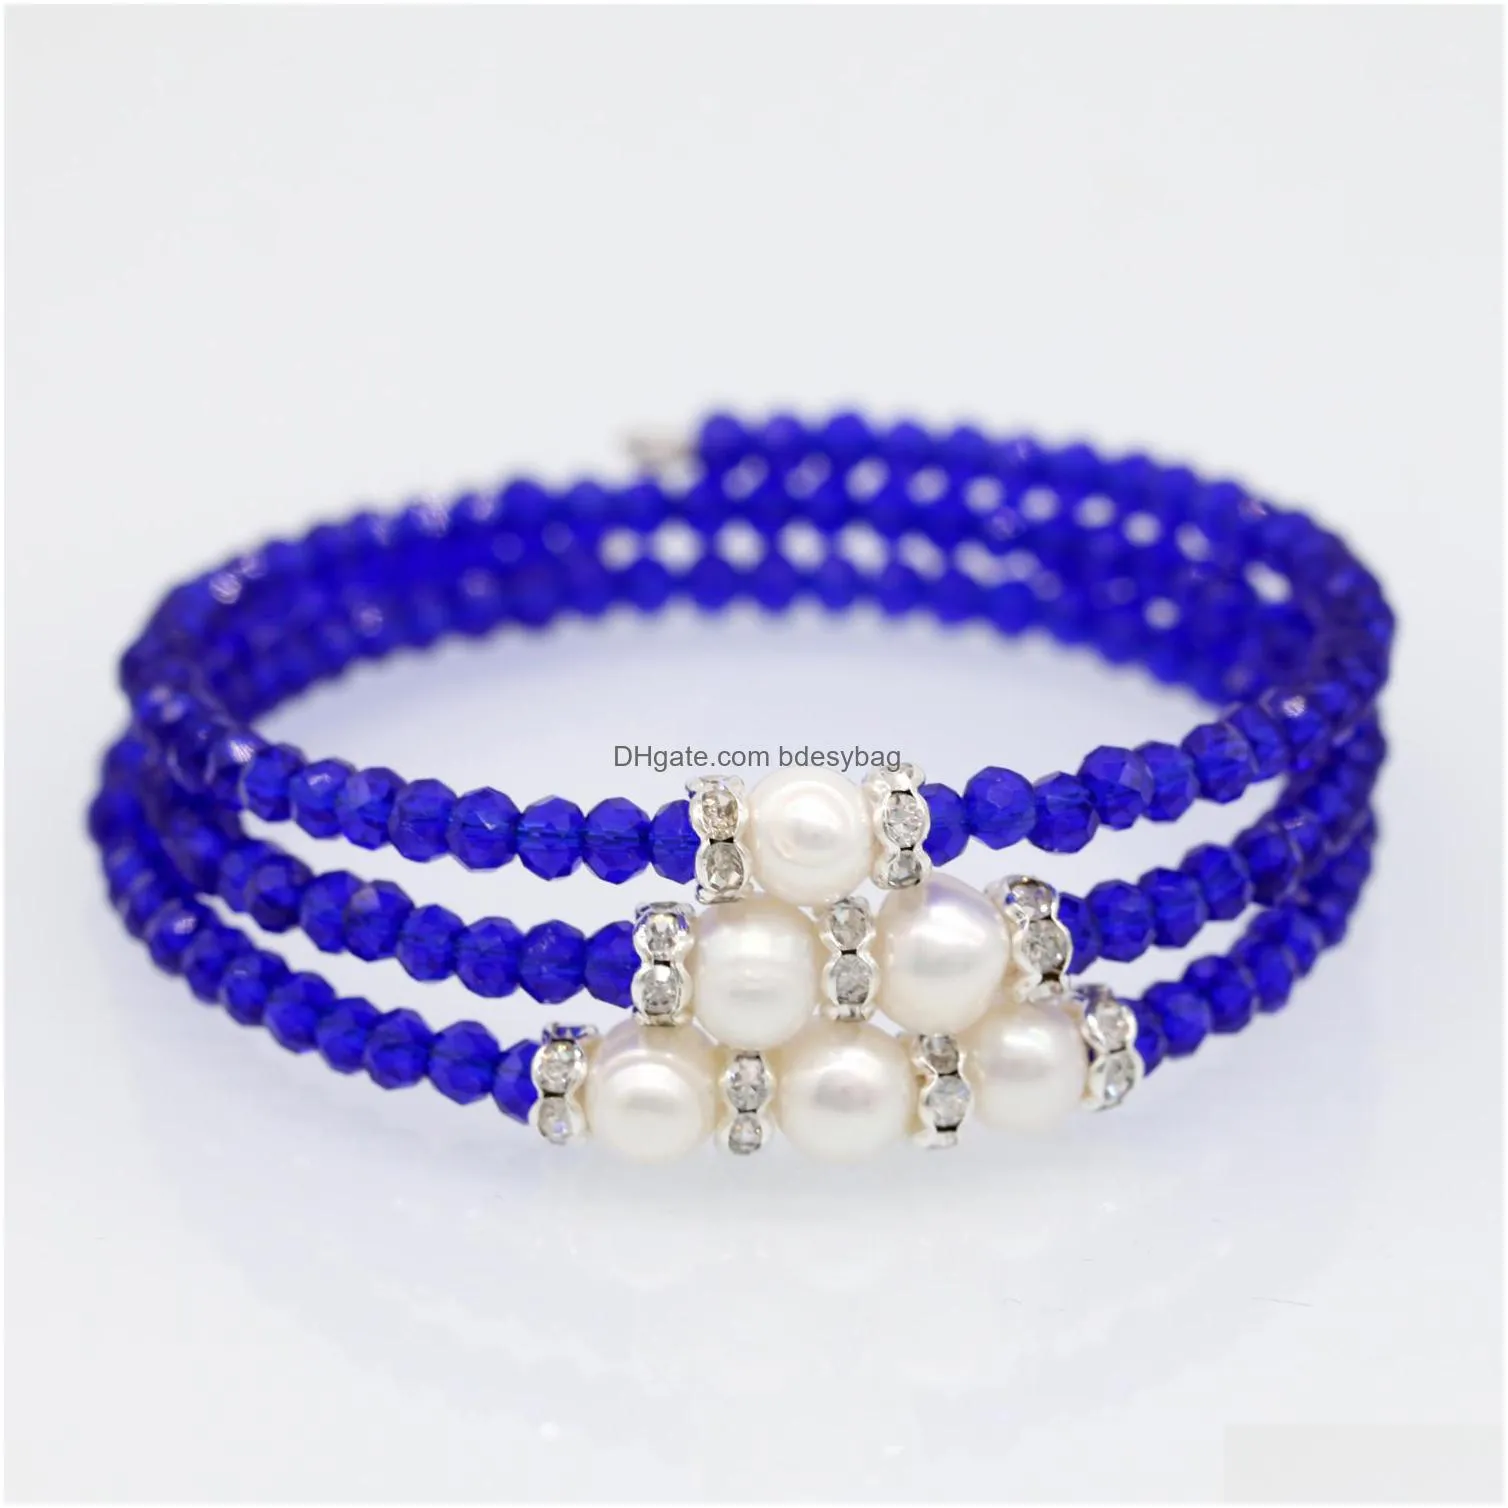 2019 new crystal bracelet with pearl 10 colors handmade pearl jewelry wrap bracelet charms womens gift love wish pearl jewelry